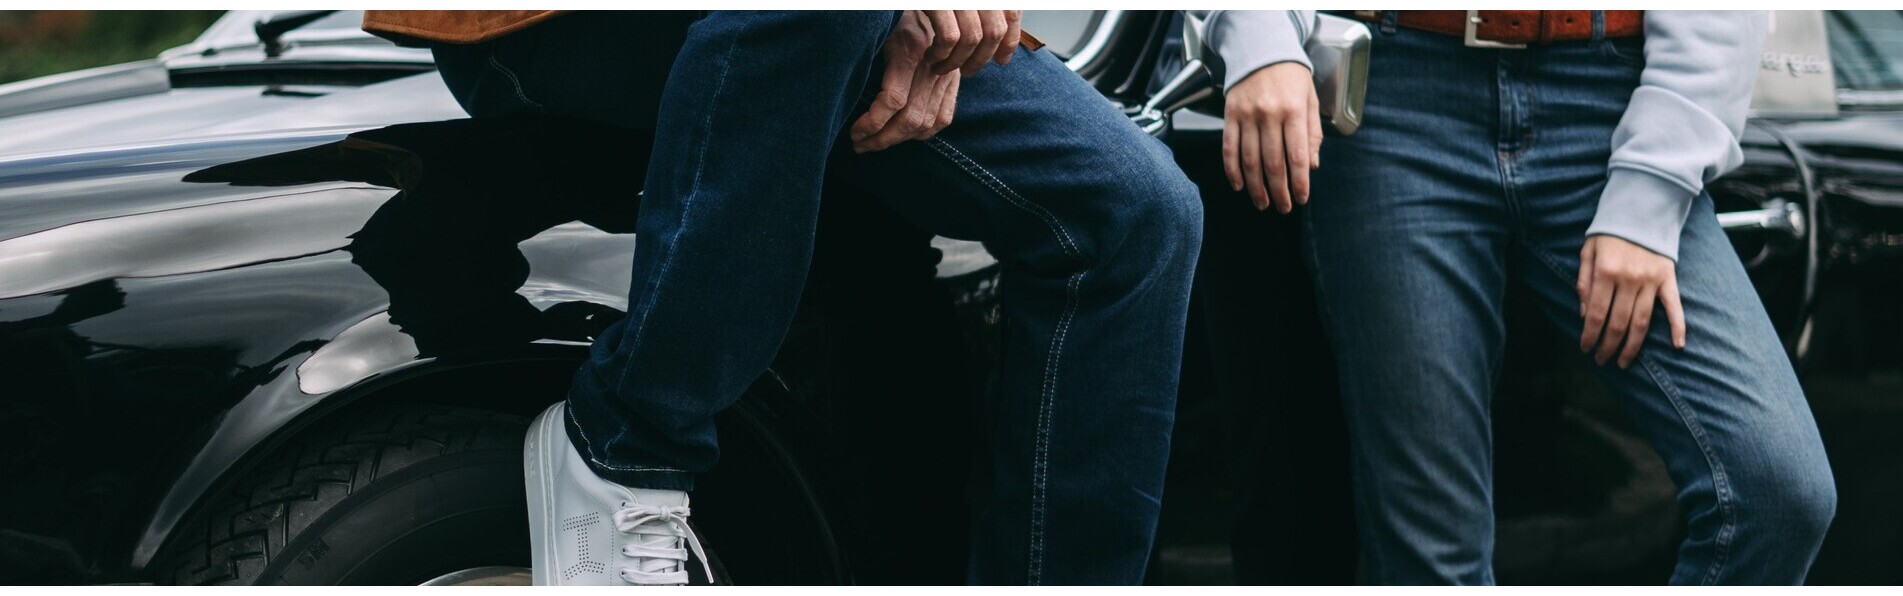 https://www.kronopolo.com/image/cache/catalog/Jeans%20Selvedge/what%20are%20selvedge%20jeans-1903x596.jpg